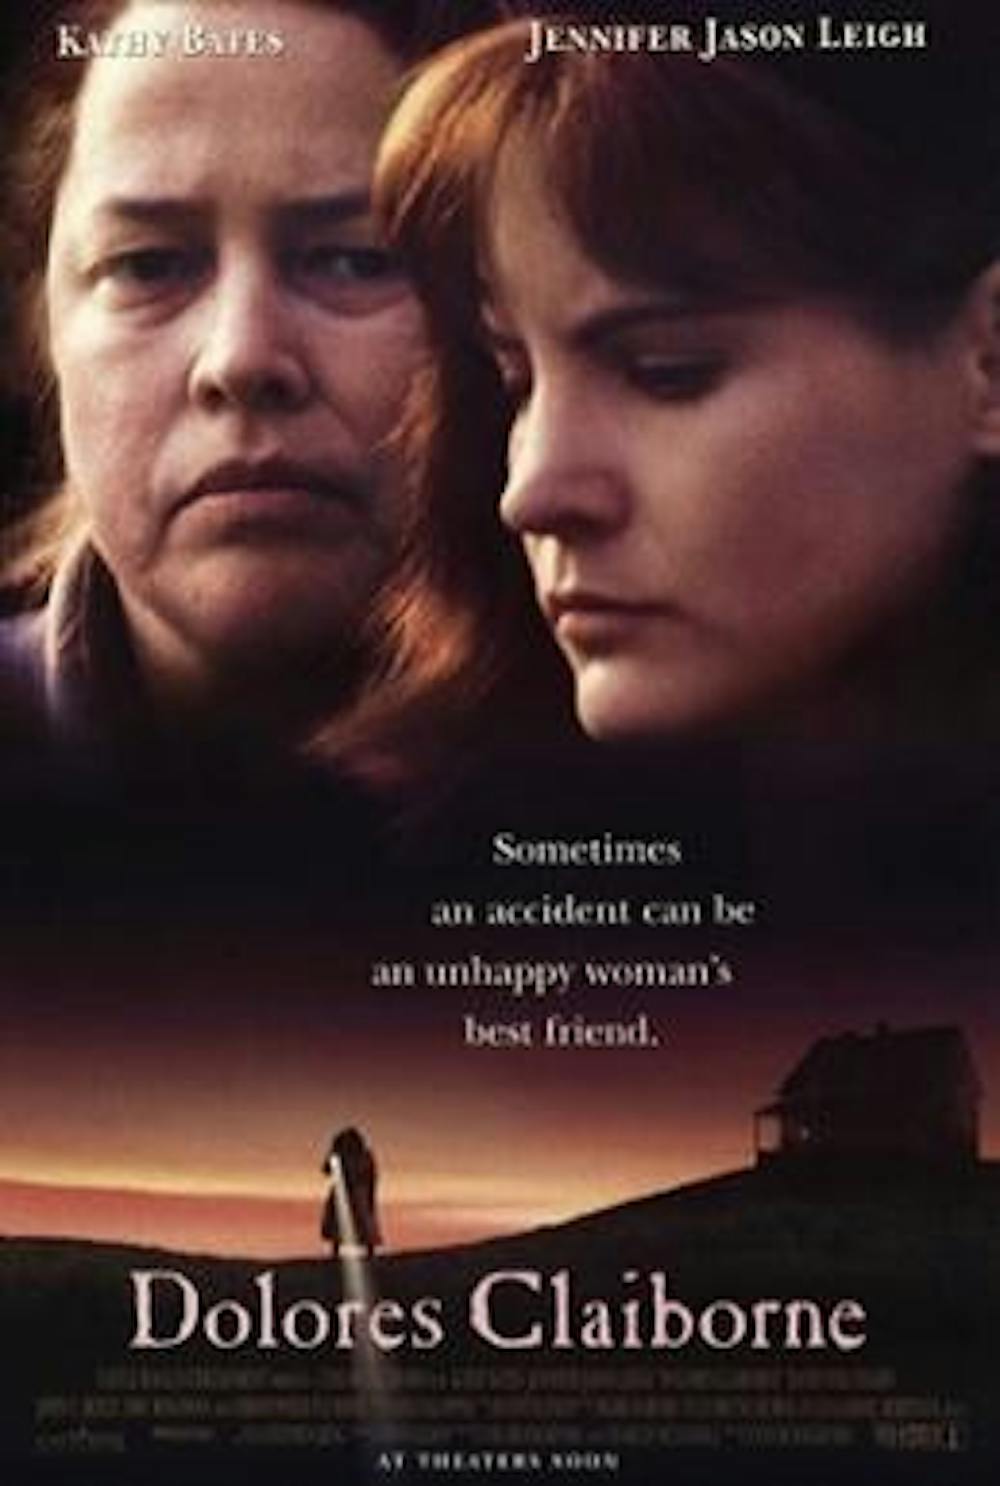 <p>This week's Forgotten Films focuses on "Dolores Claiborne," an underrated Stephen King adaptation with one of Kathy Bates' best roles as the titular protagonist.</p>